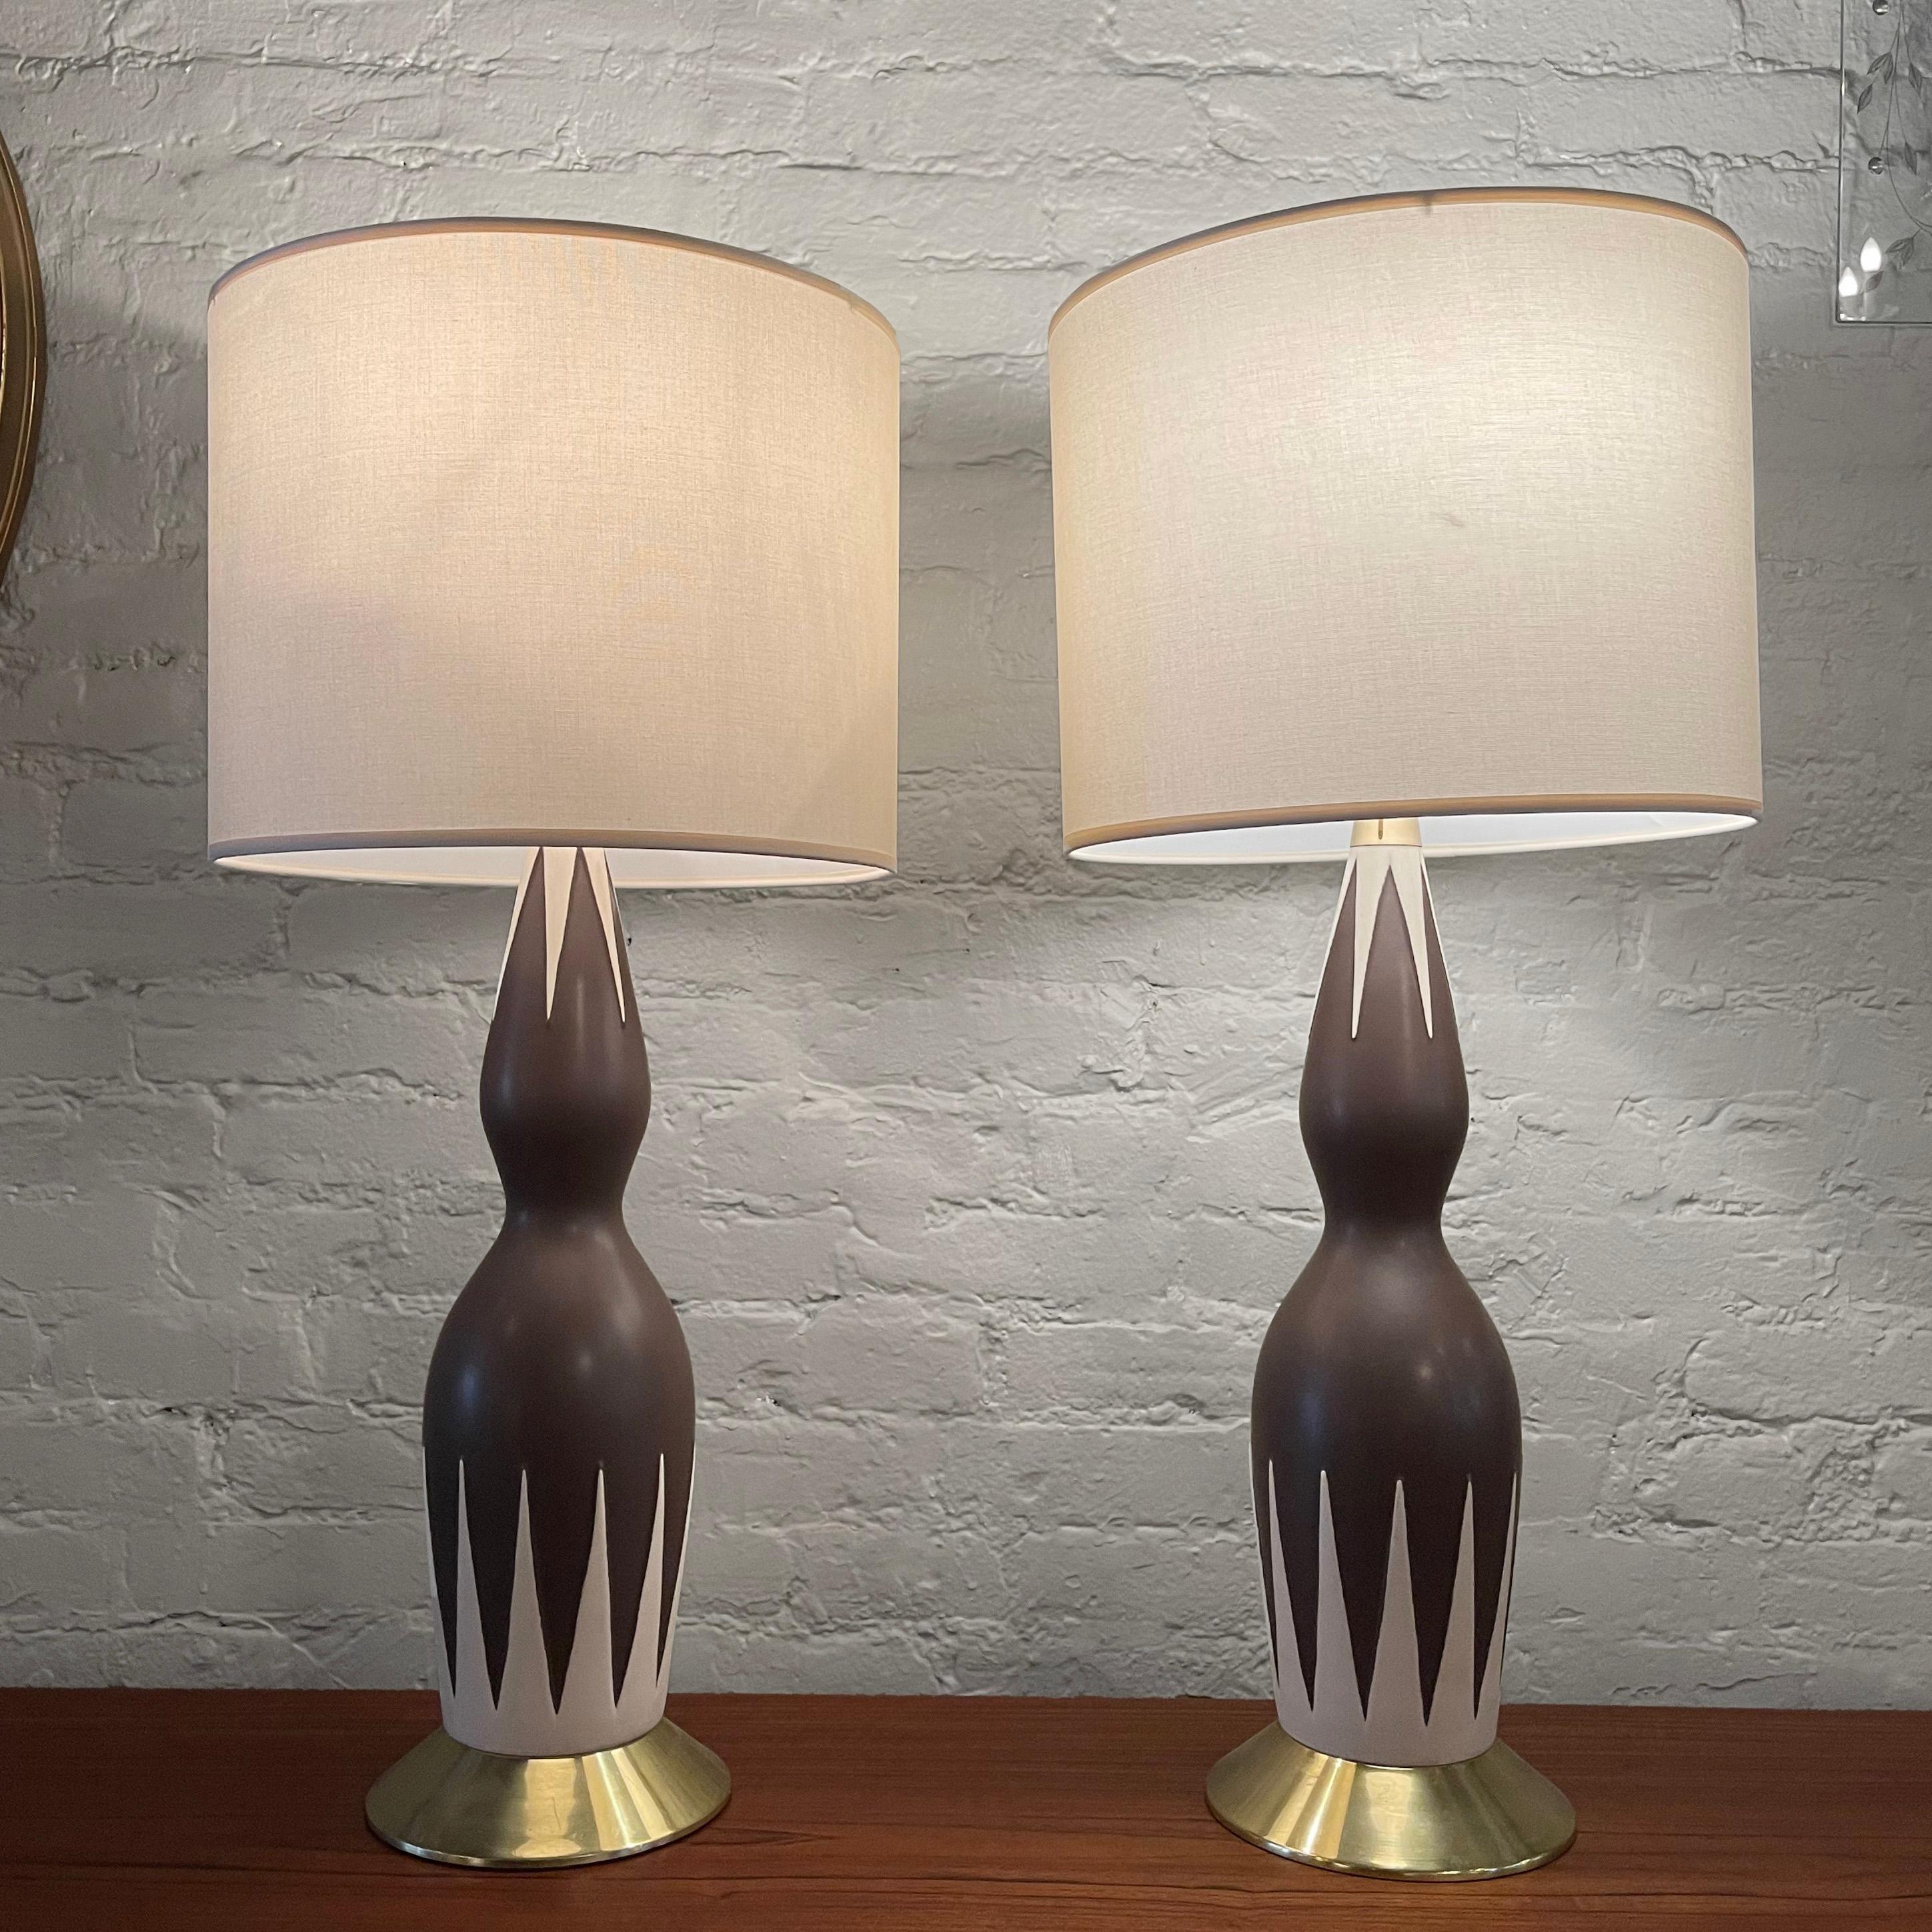 Pair of striking, Mid-Century Modern, table lamps by Gerald Thurston for Lightolier feature brown and beige ceramic hourglass bodies with brass accents - base, neck, pull chains and original finials. The lamps accept 3 bulbs each up to 120 watts.